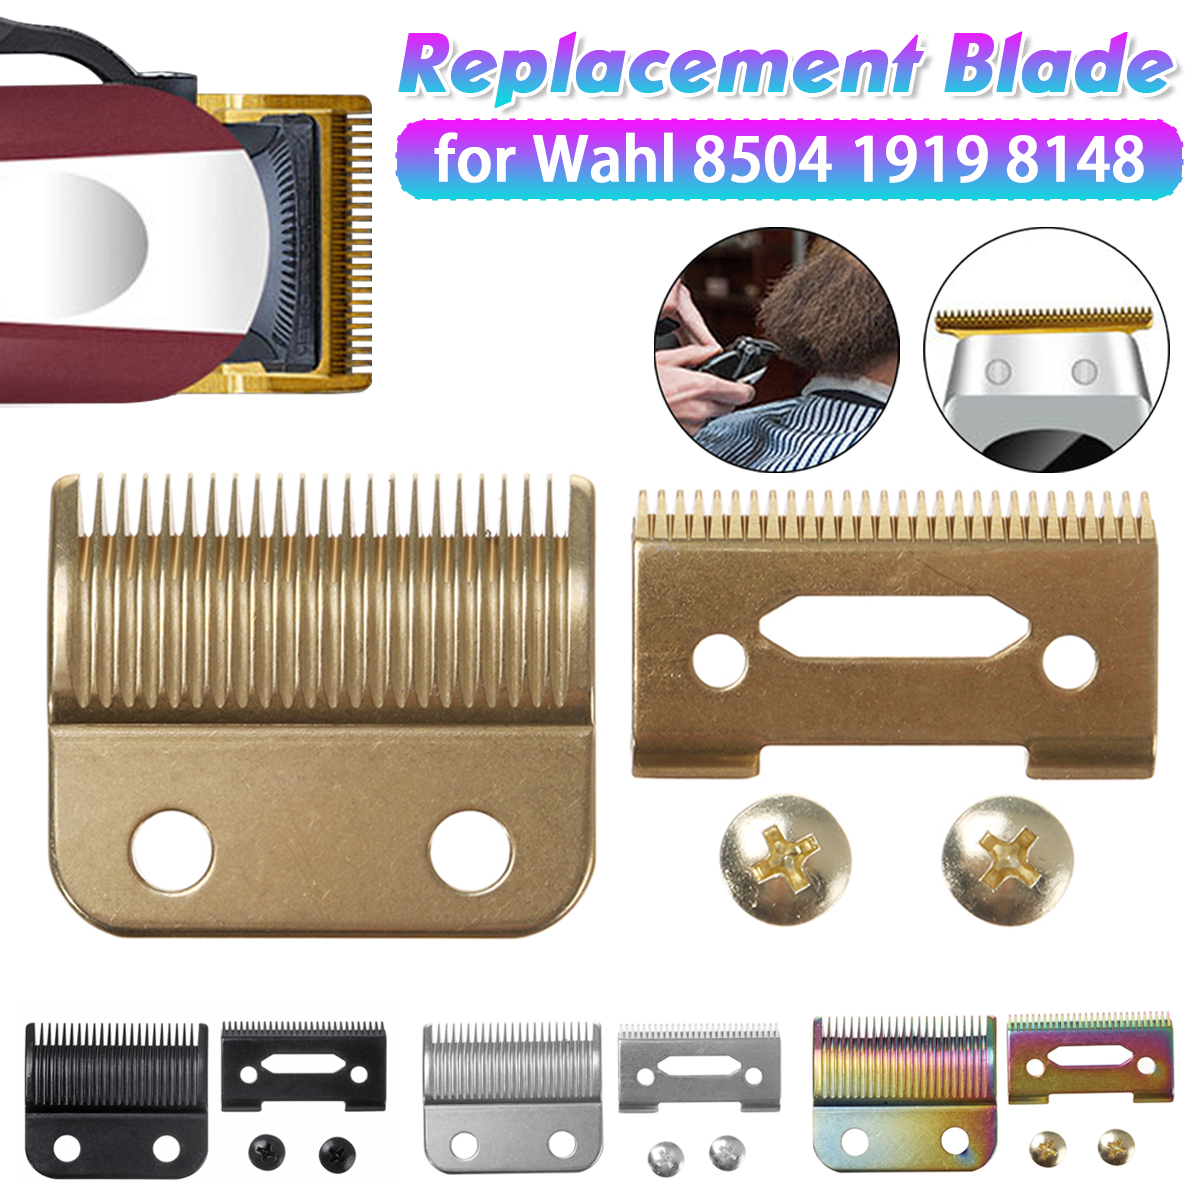 2-in-1-Hair-Cutter-Head-Metal-Bottom-Clipper-Replace-Blade-For-Wahl-Electric-Shear-1925992-2